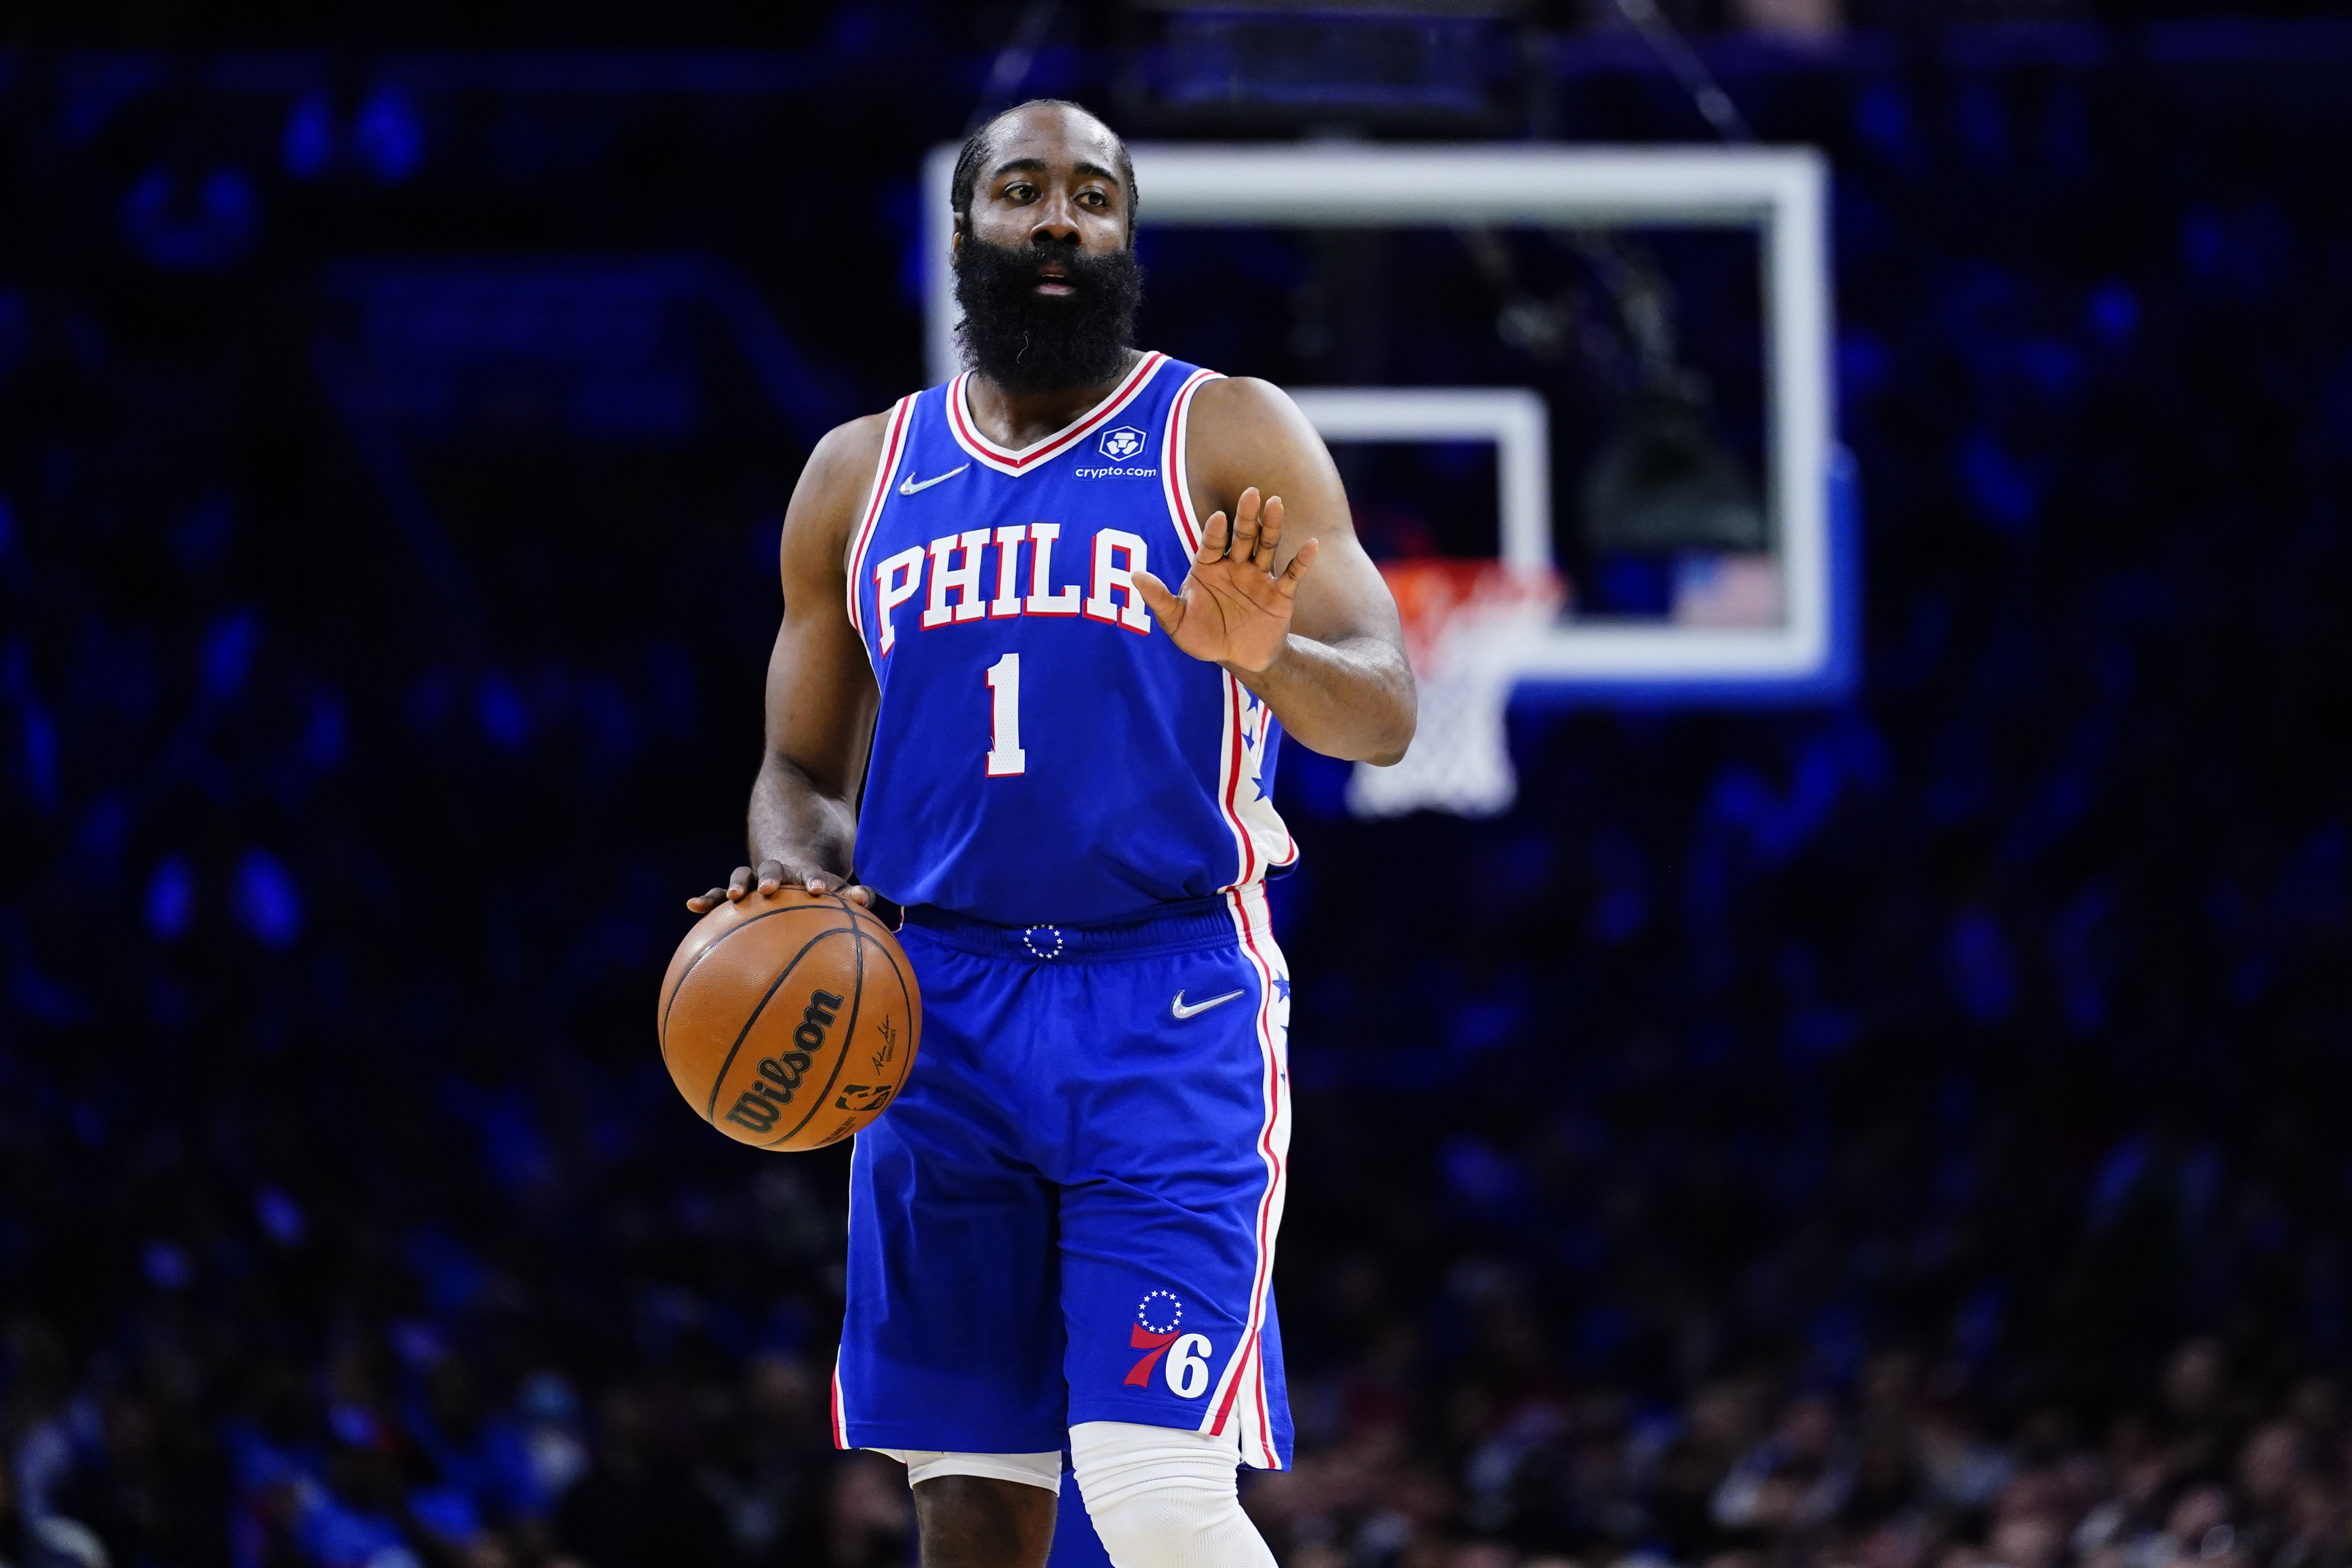 Brooklyn Nets: James Harden gets booed after play